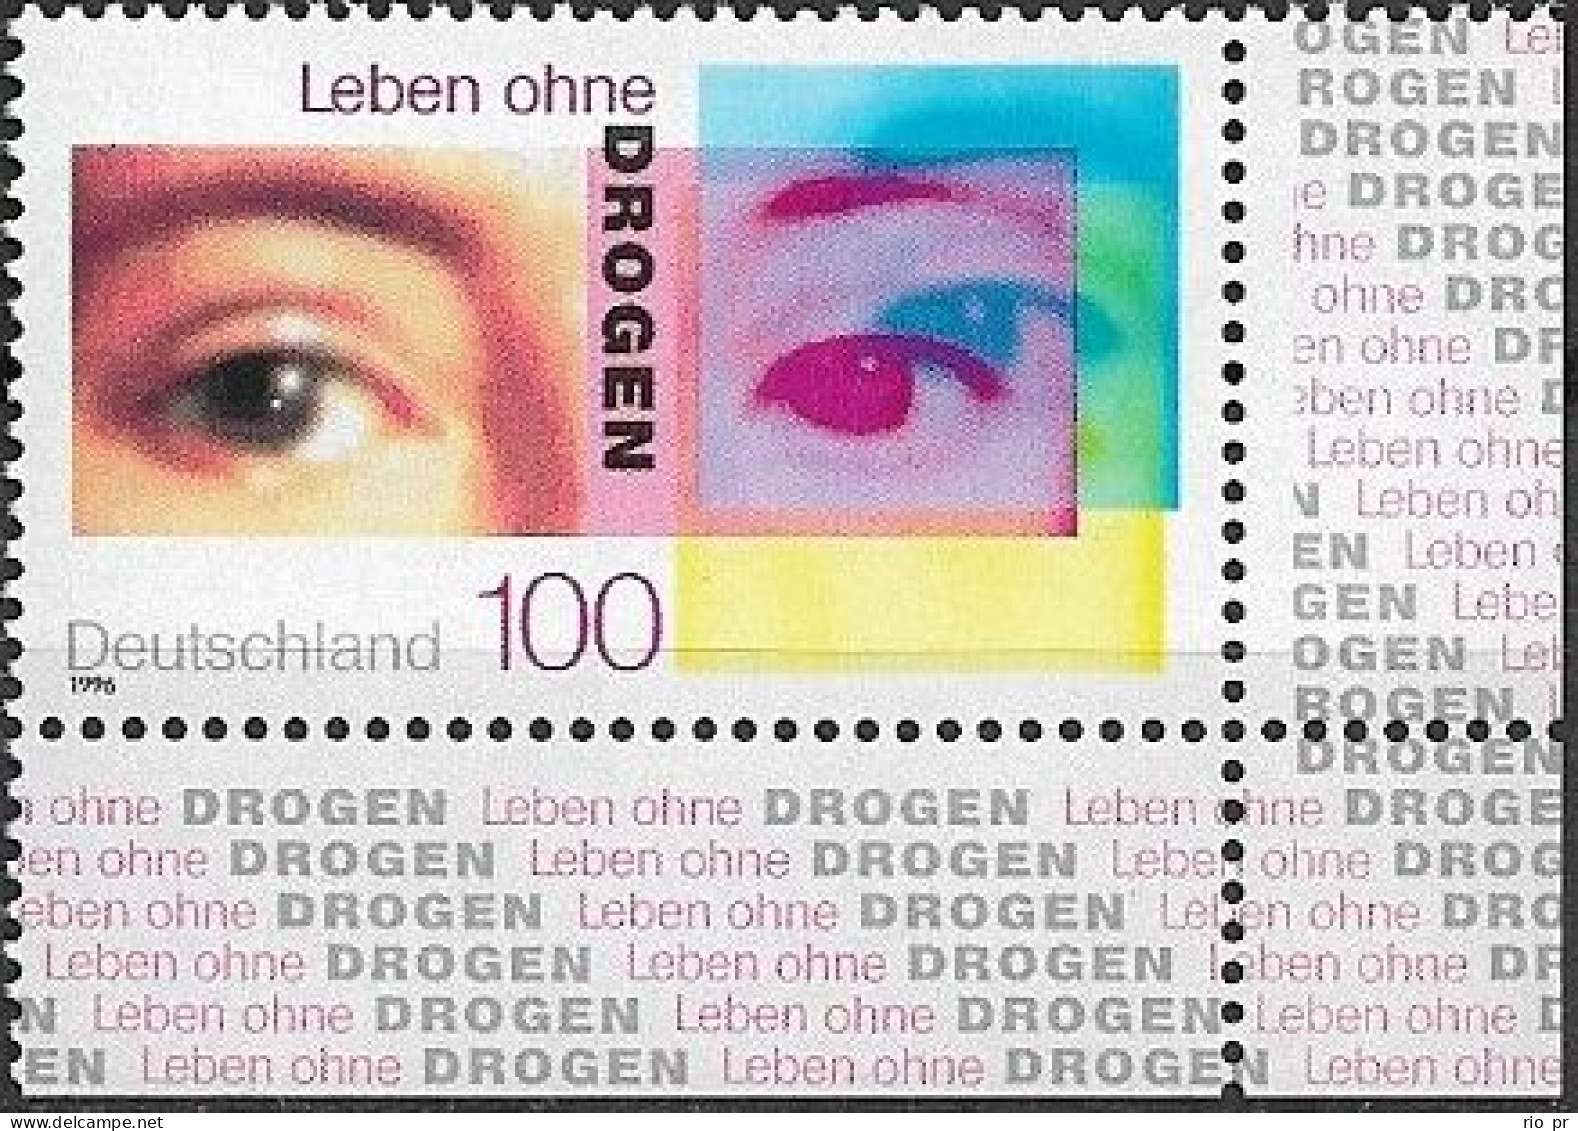 GERMANY (BRD) - CAMPAIGN AGAINST DRUG ABUSE (BOTTON RIGHT CORNER) 1996 - MNH - Drugs